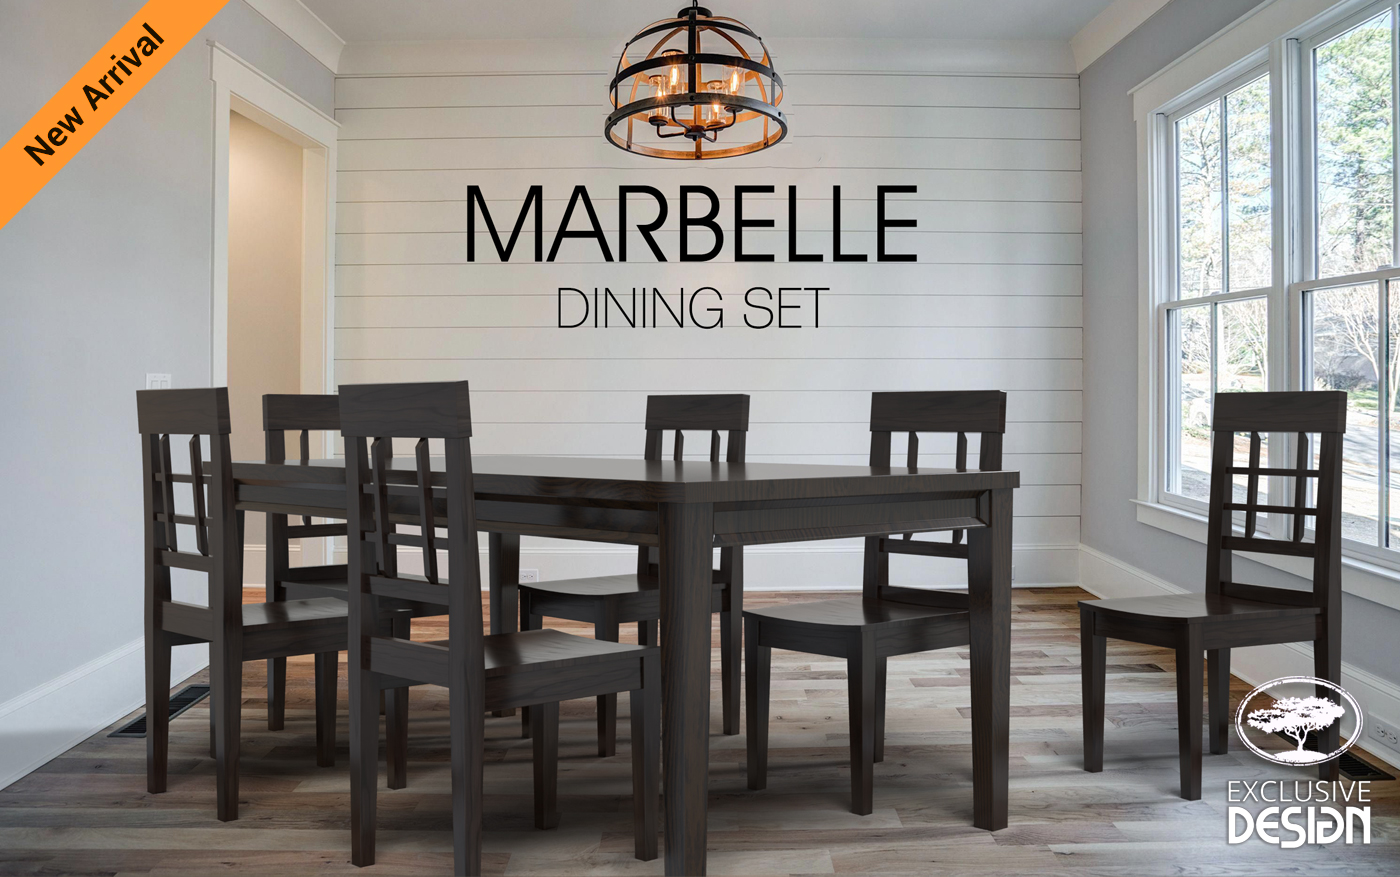 Marbelle Dining Room Table